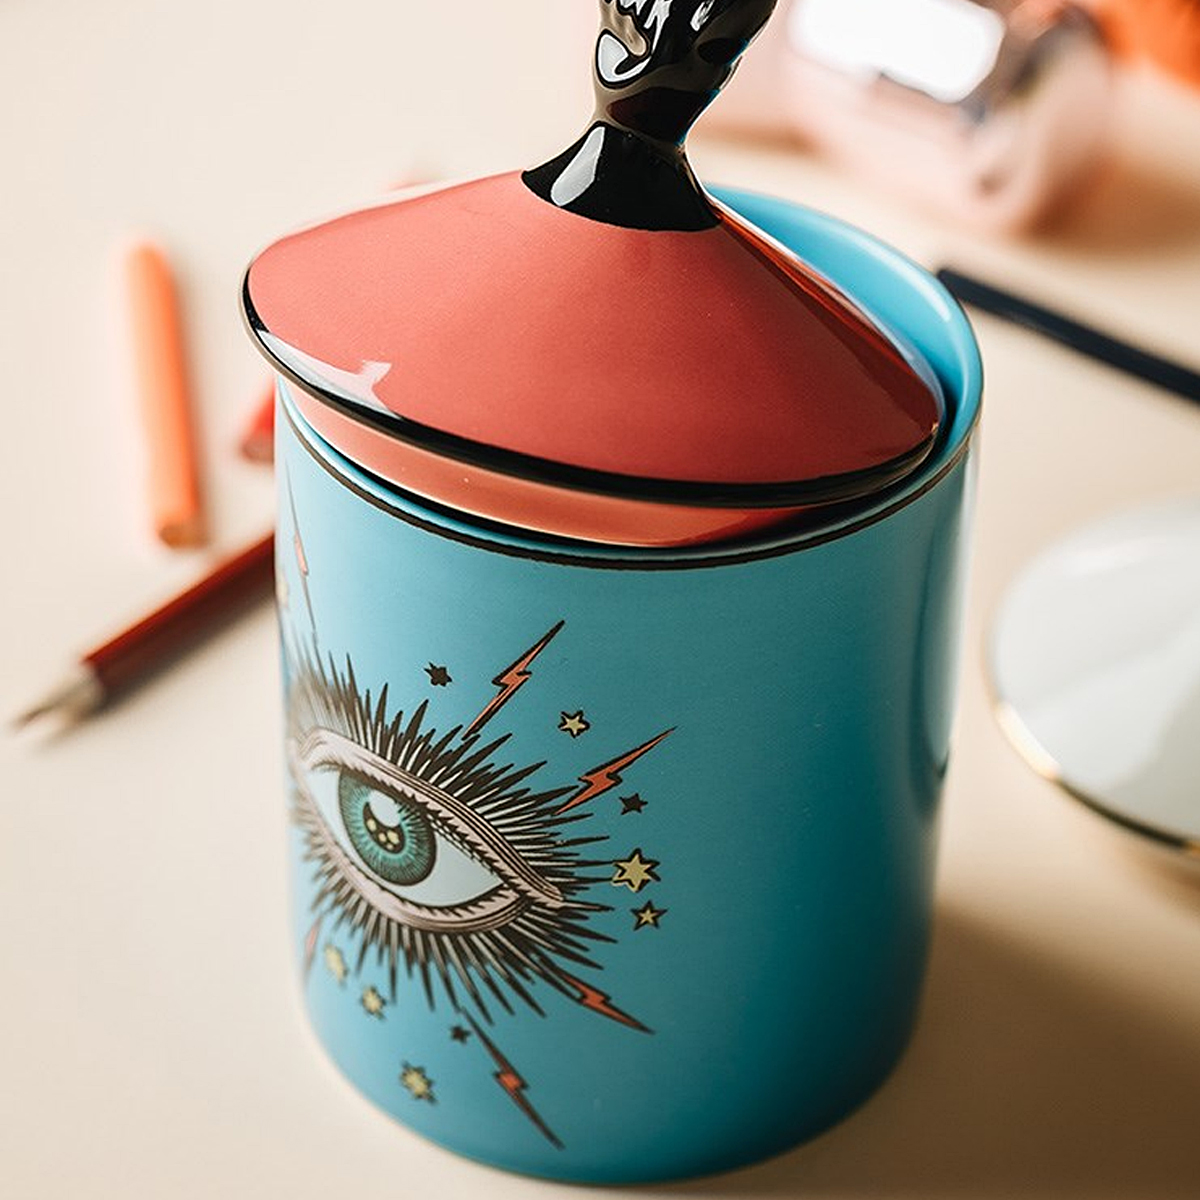 Big-Eyes-Jar-Hands-with-Ceramic-Lids-Decorative-Cans-Candle-Holders-Storage-Cans-Cosmetic-Storage-Ta-1649421-10